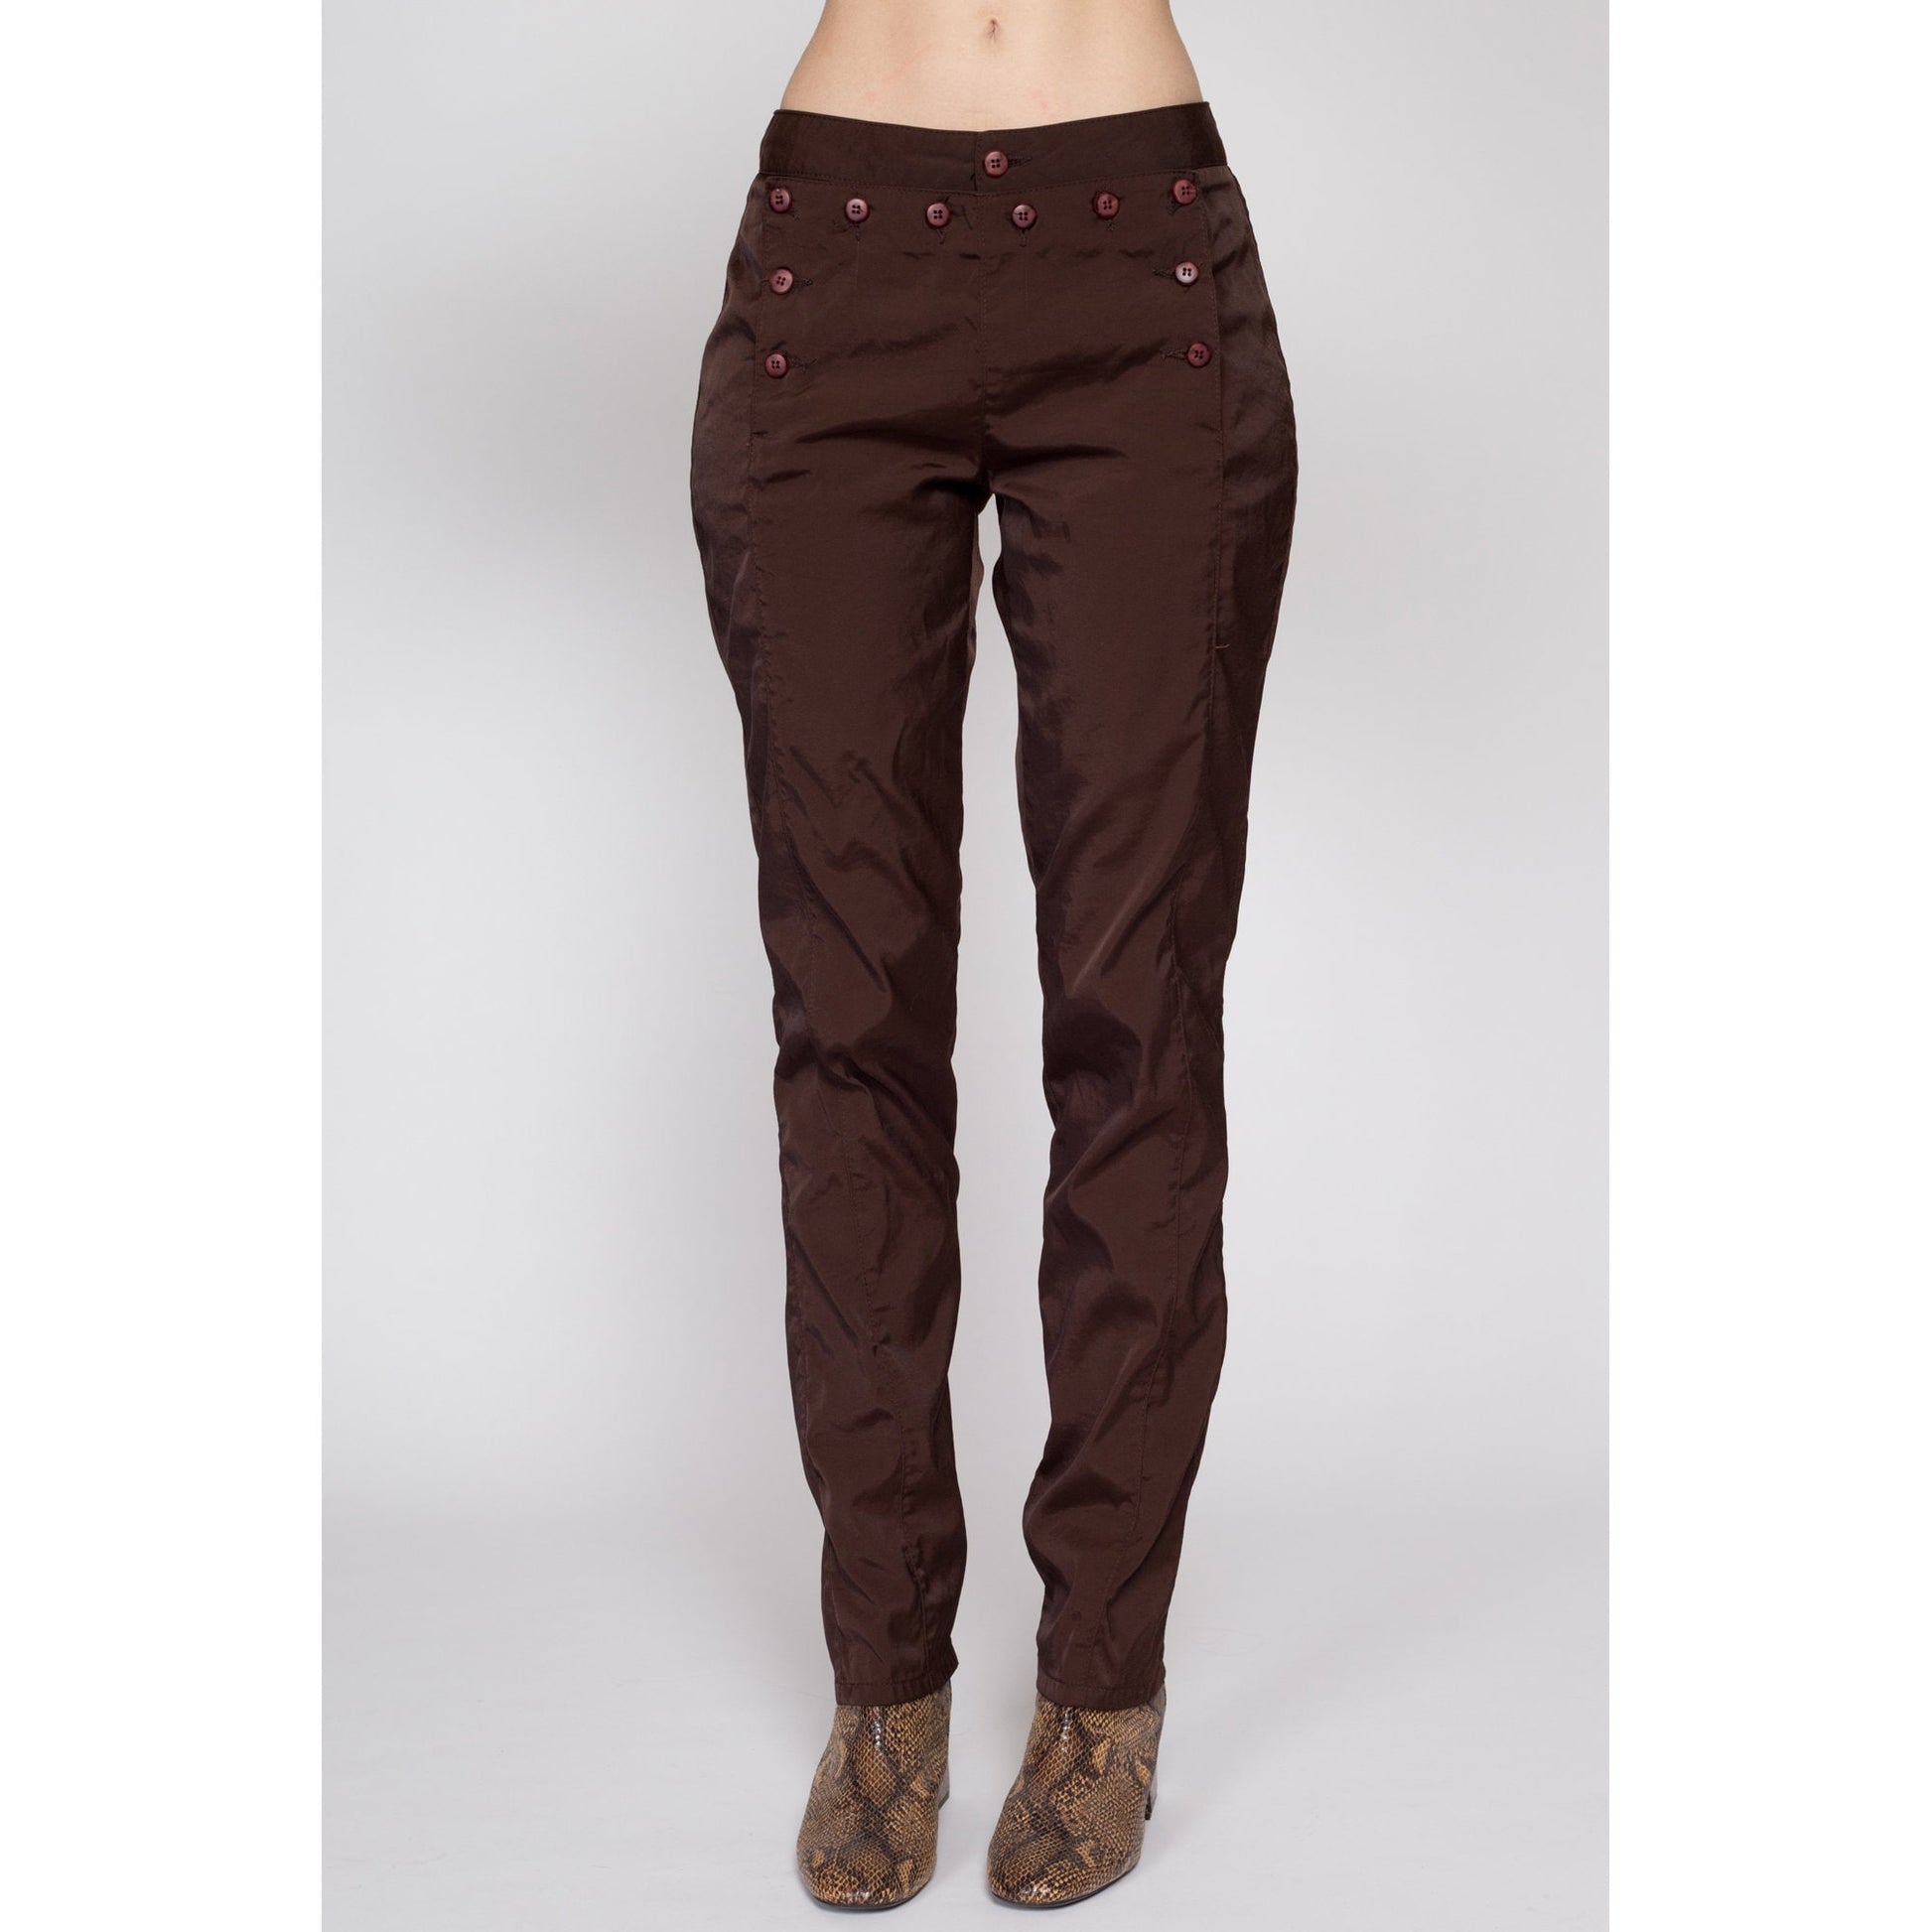 Sonoma Mid Rise Capris Pants Brown Spicy Choc Size 8